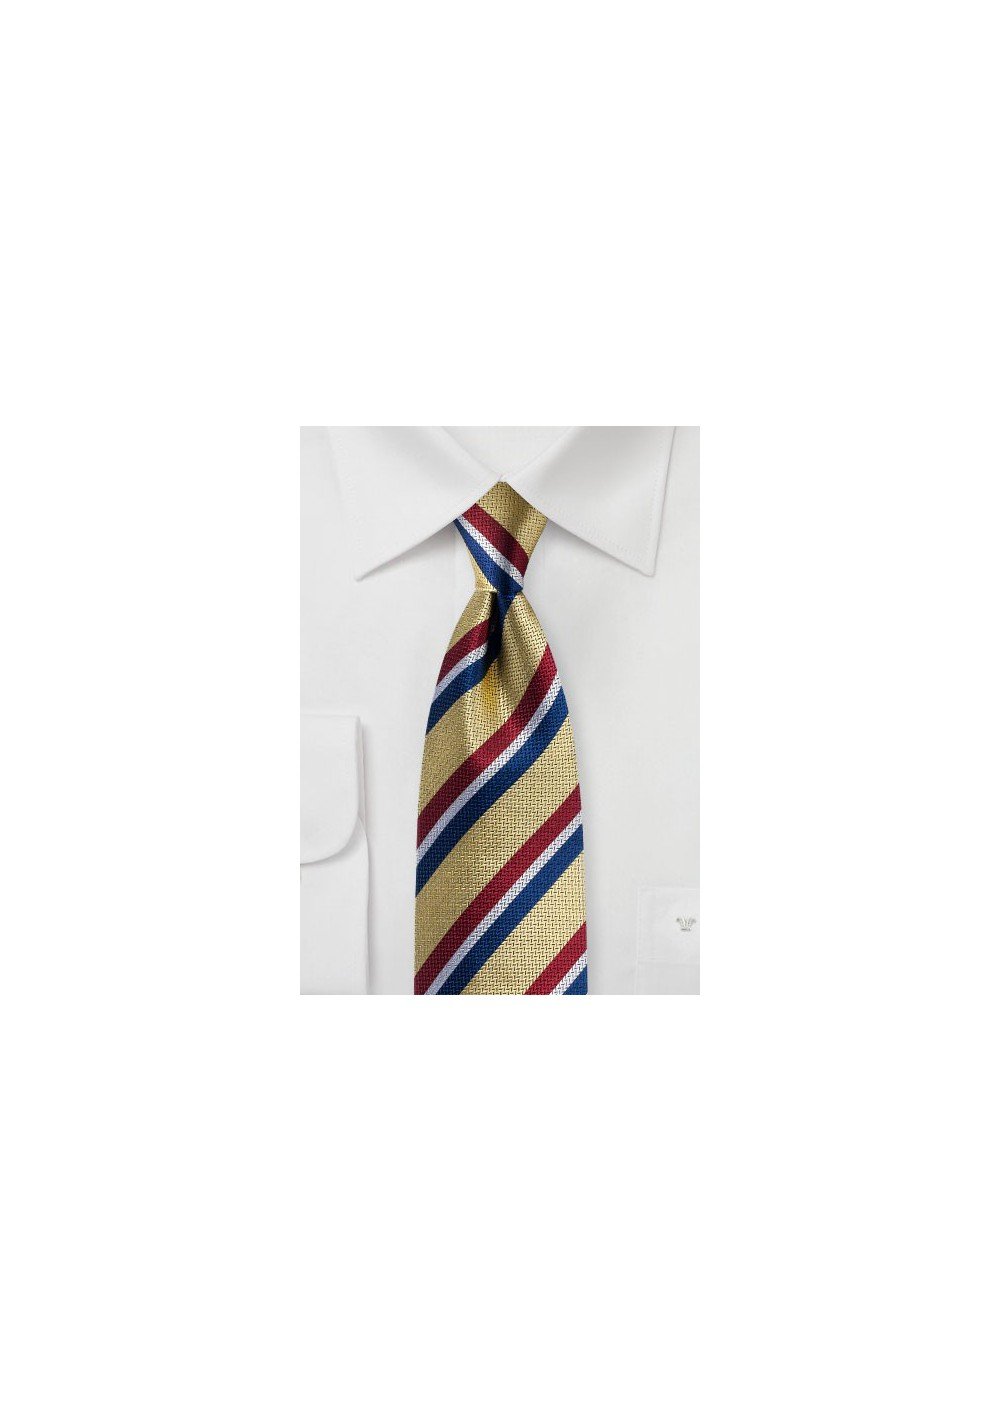 Gold Designer Tie with Red, White, Blue Stripes